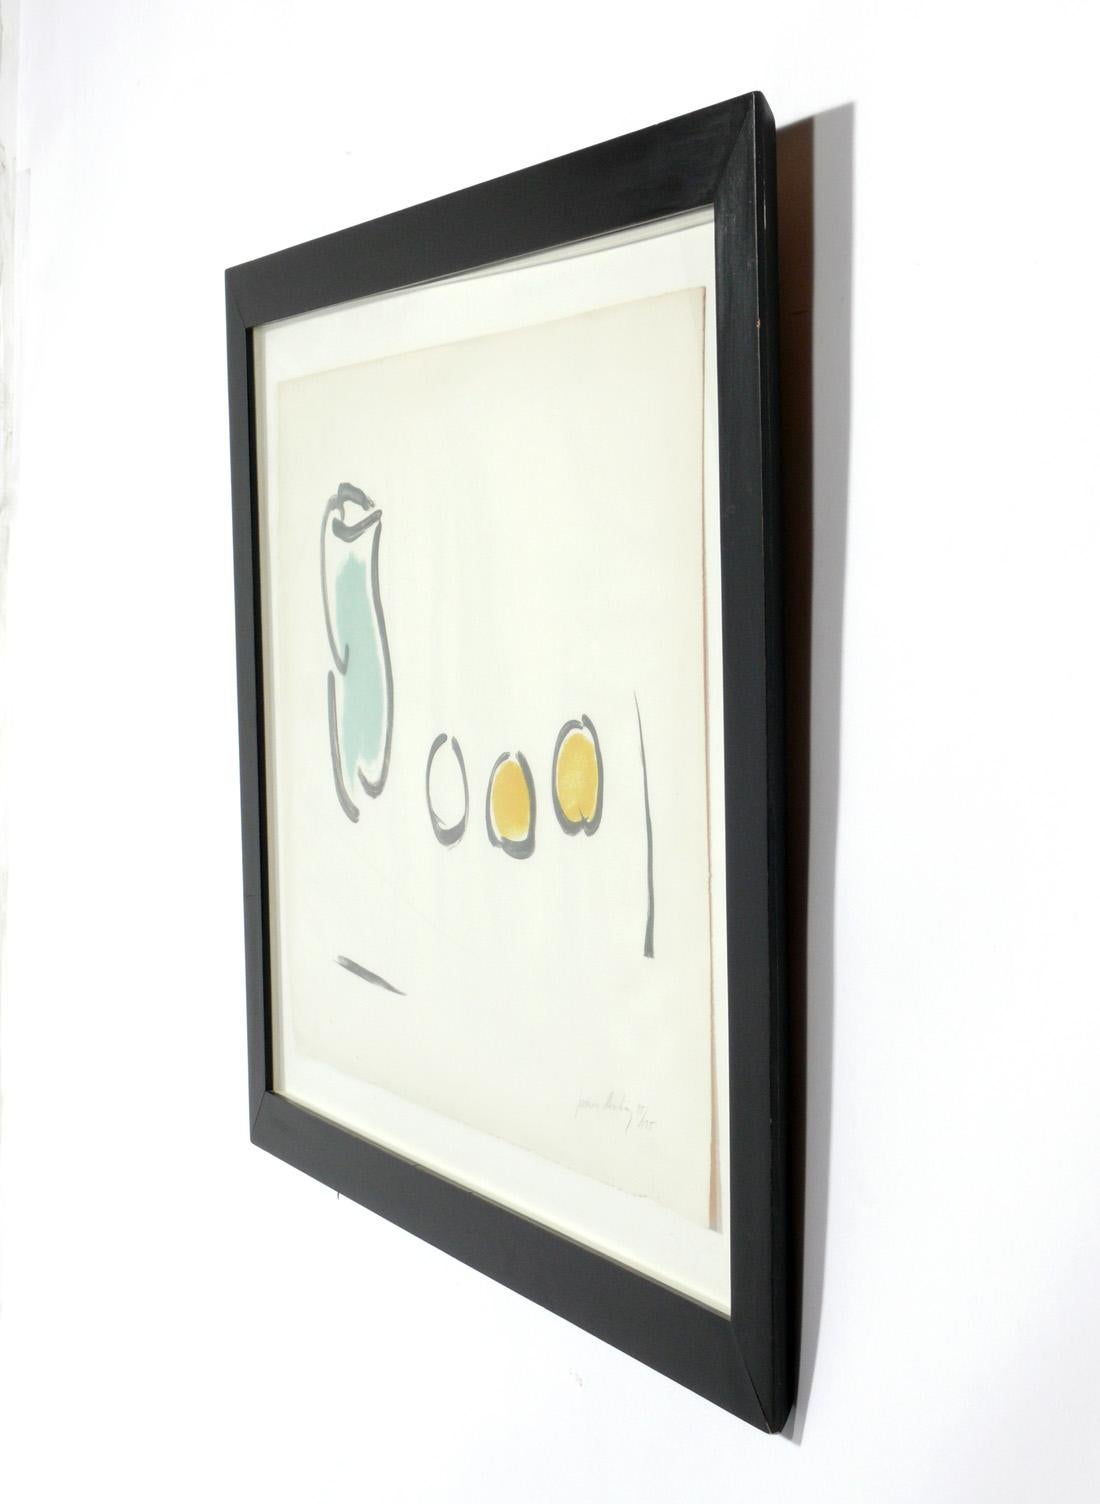 Modernist abstract still life lithograph by James Lechay (1907-2001), American, circa 1980s. Pencil signed and numbered 95/175 by the artist. Lechay was clearly influenced by the Minimalist brushwork of Henri Matisse. Retains it's original clean